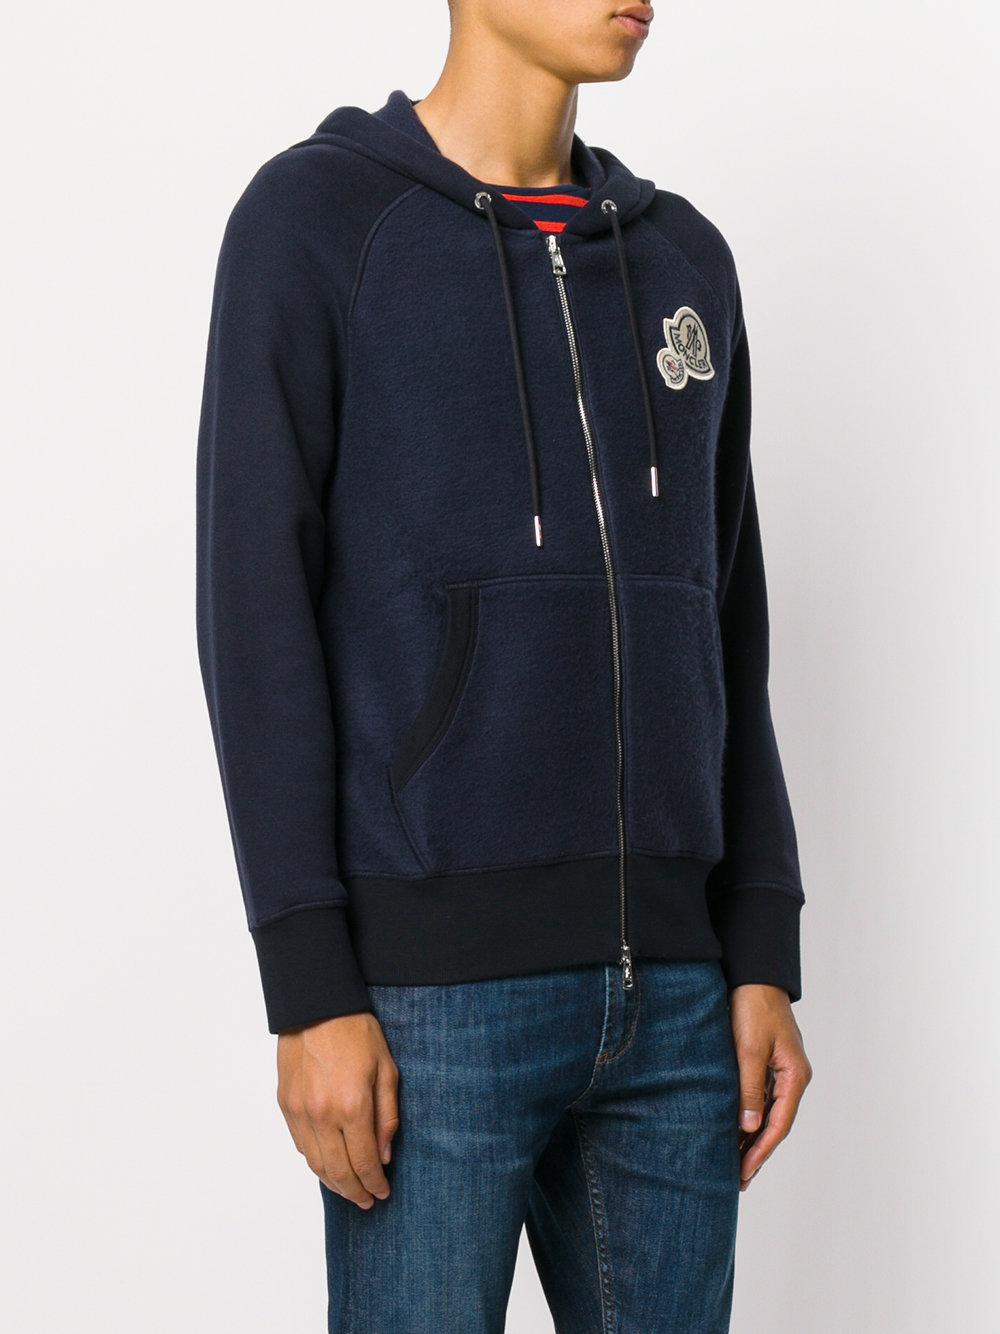 Moncler Cotton Double Logo Hoodie in Blue for Men - Lyst